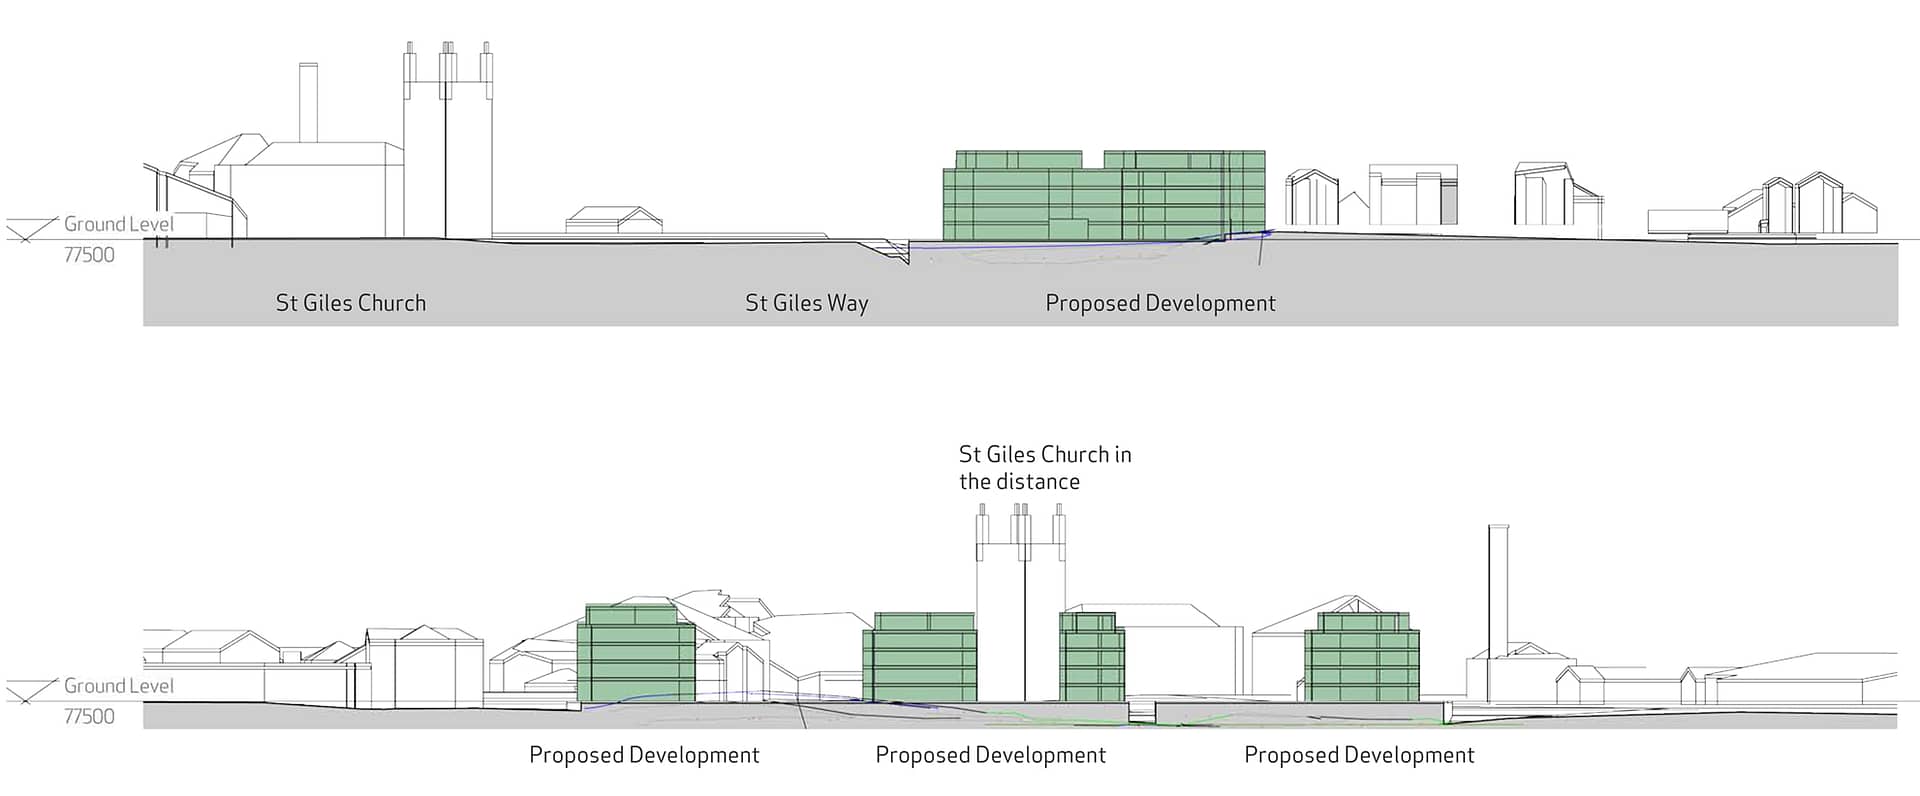 Proposed Mixed-Use Development, Wrexham Site Massing